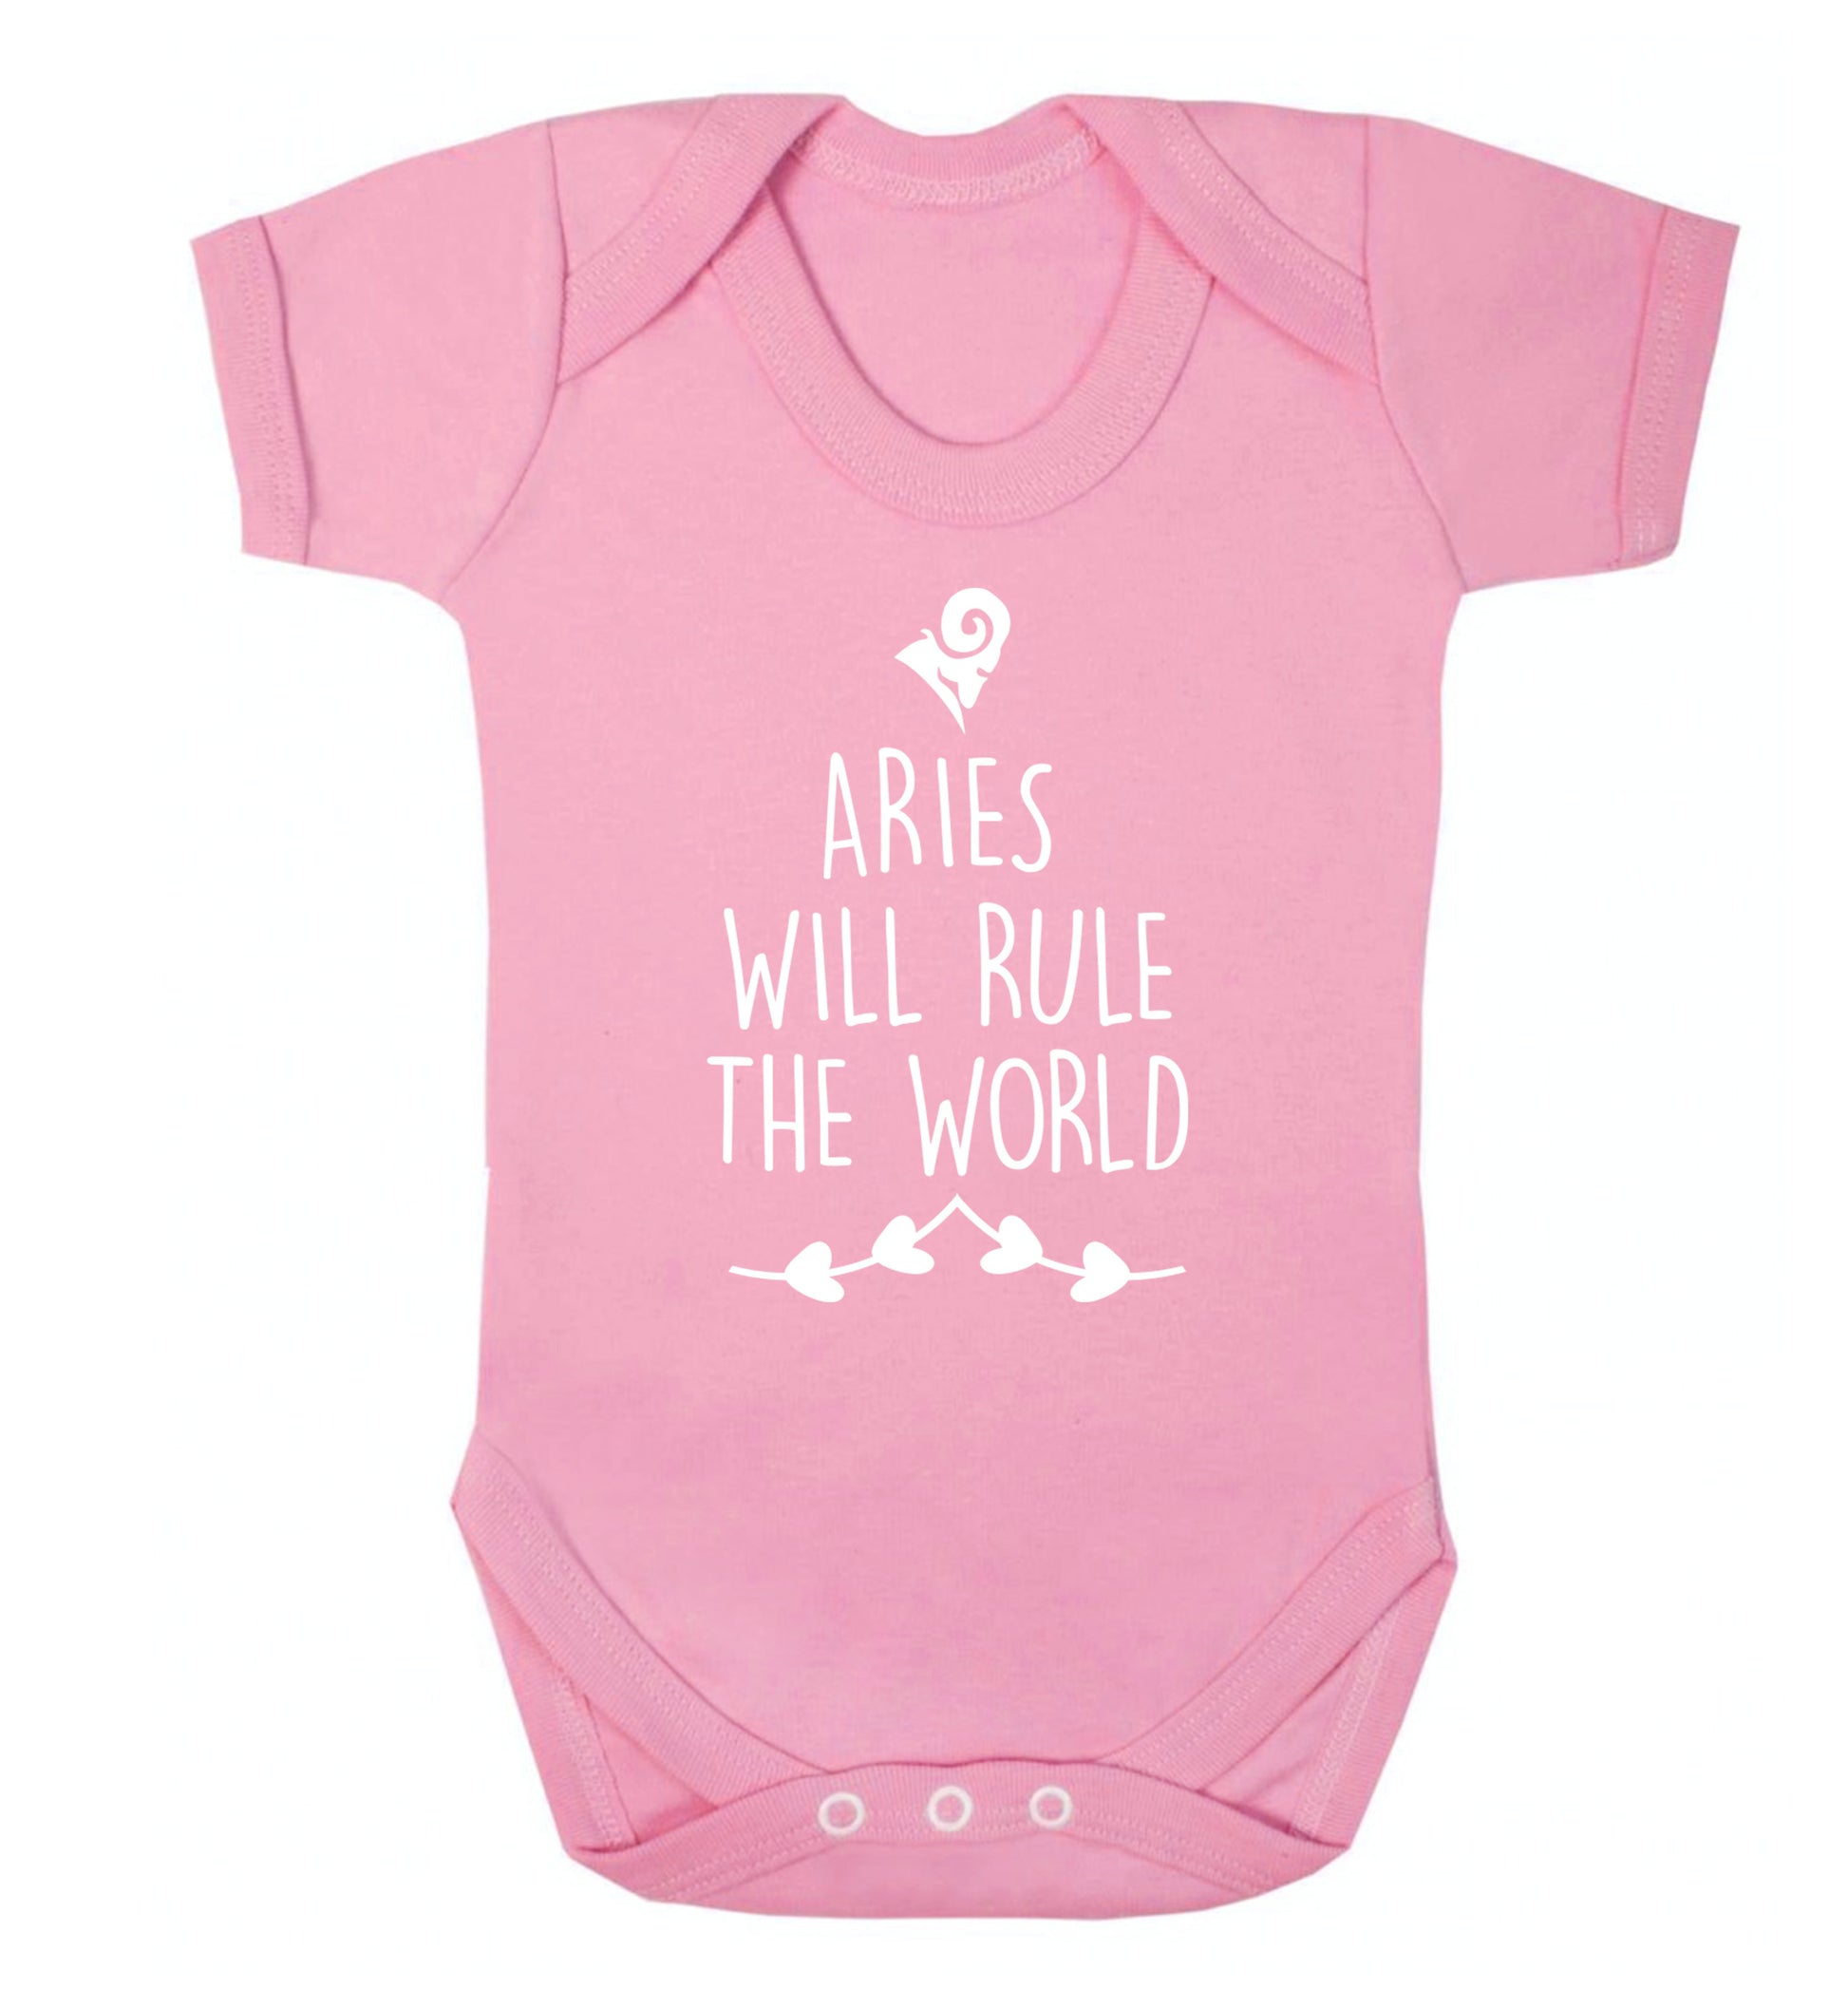 Aries will rule the world Baby Vest pale pink 18-24 months